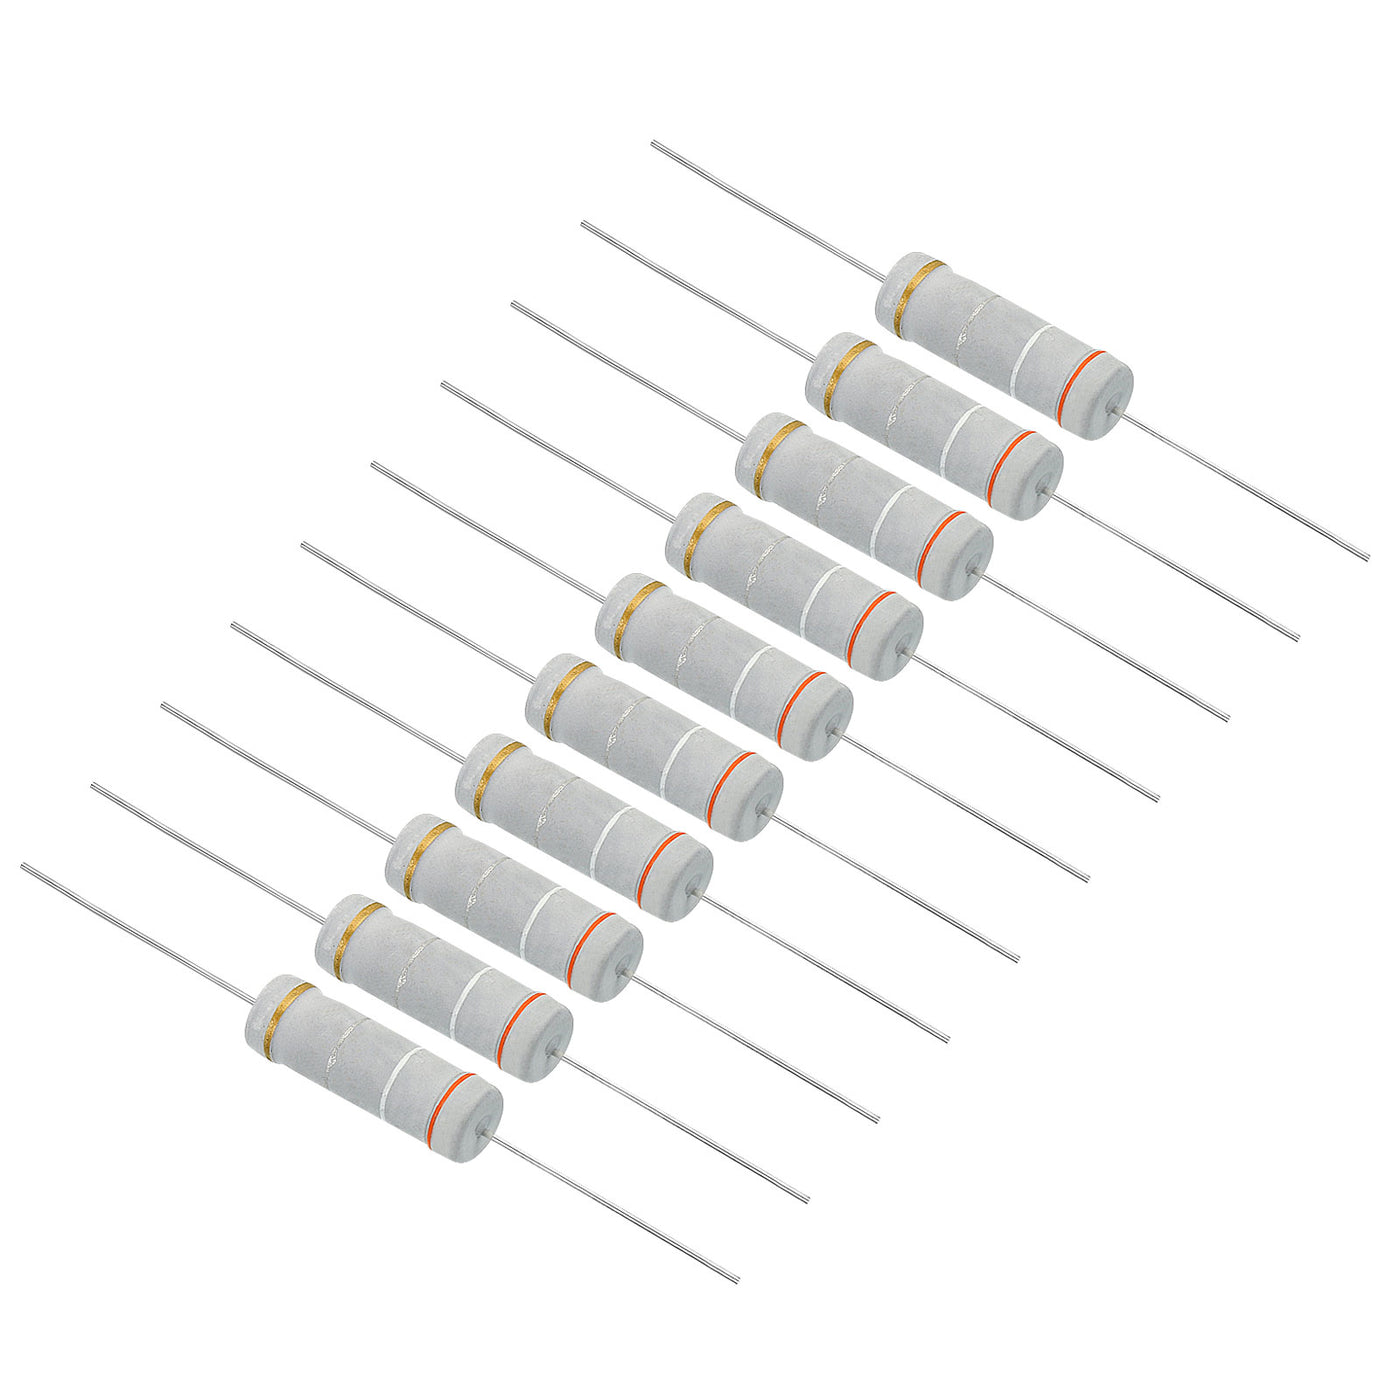 Harfington 5Watt 0.39 Ohm Carbon Film Resistor, 20 Pcs 5% Tolerance Resistors Axial Lead Colored Ring for DIY Projects and Experiments